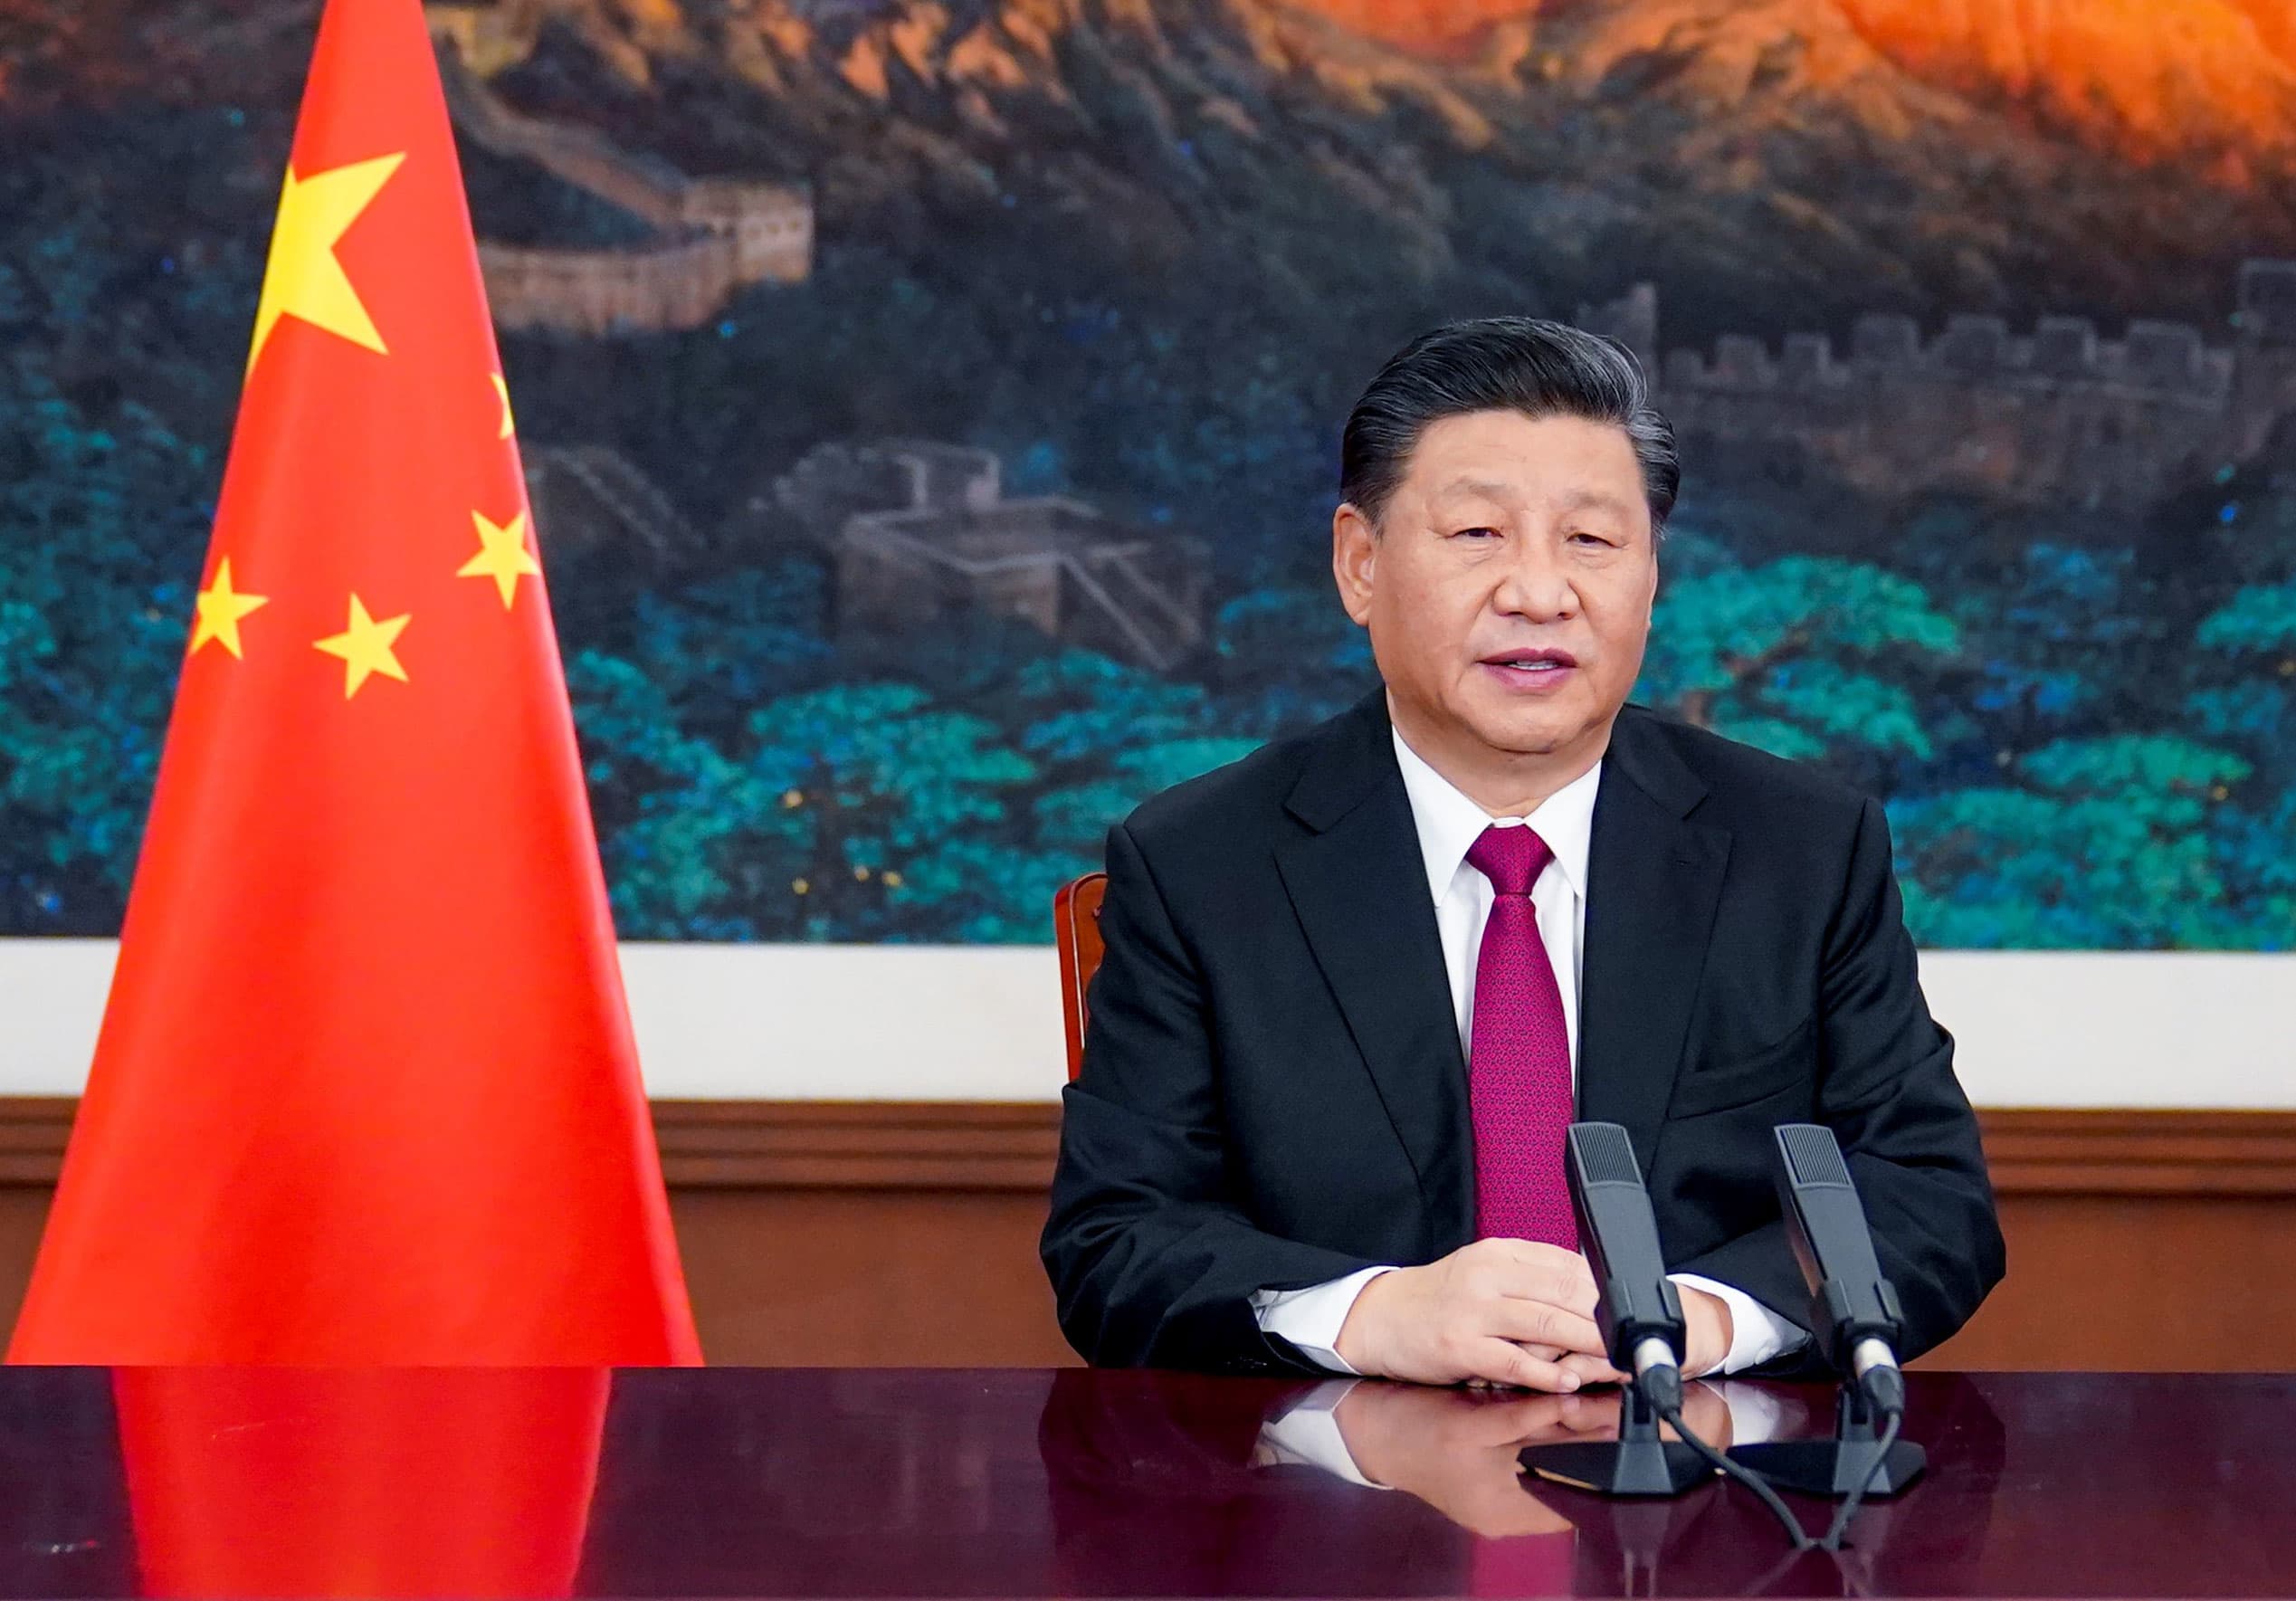 Xi says China 'will never seek hegemony' no matter how strong it becomes